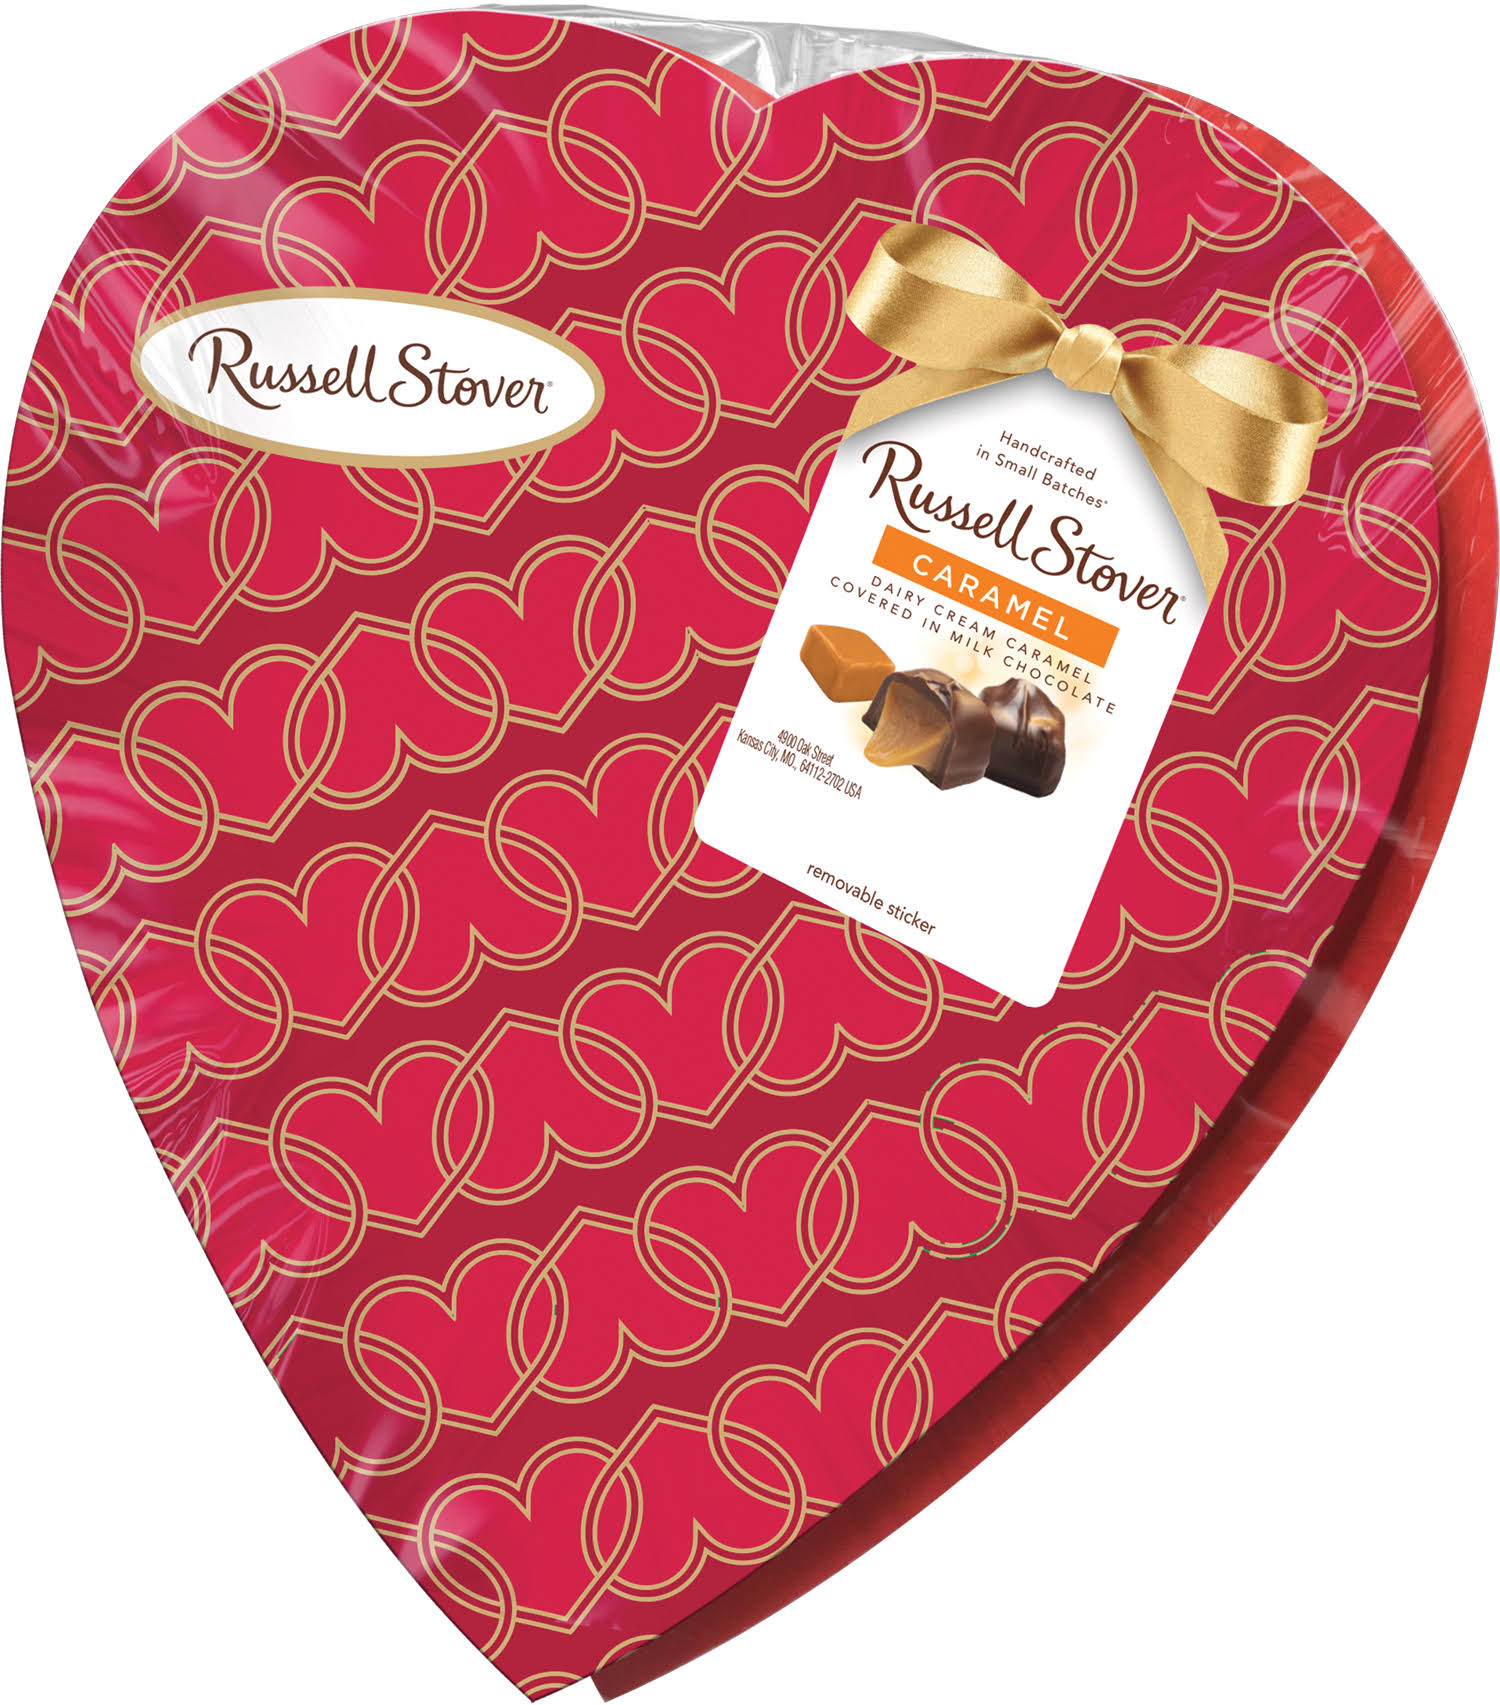 Russell Stover Milk Chocolate, Caramel - 6.7 oz